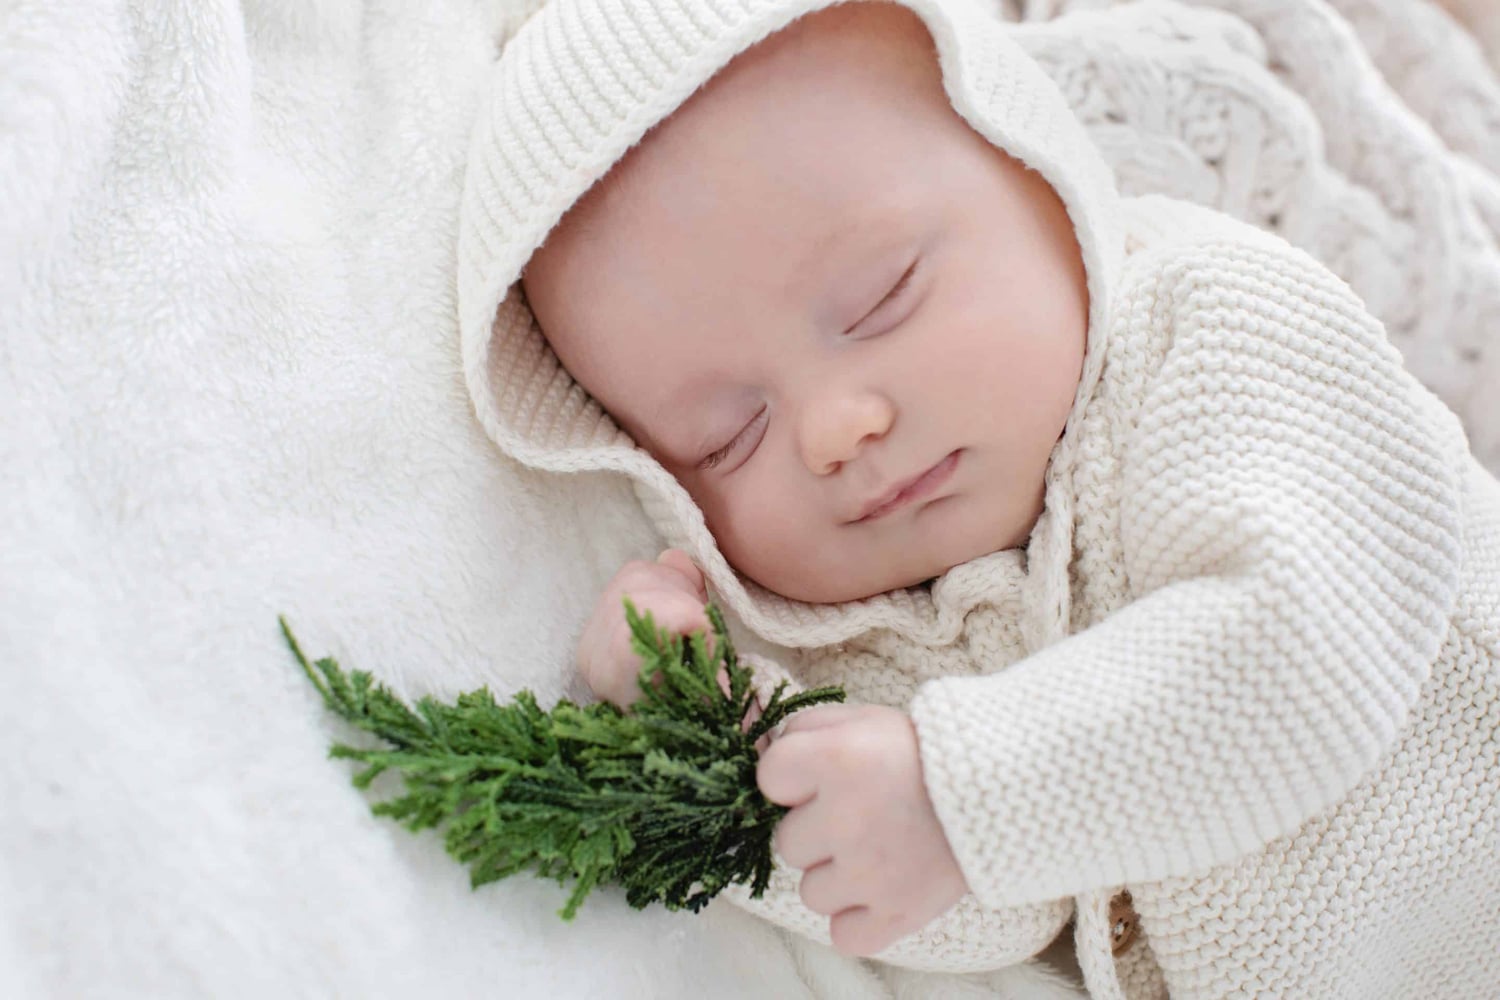 A baby holds a piece of evergreen.